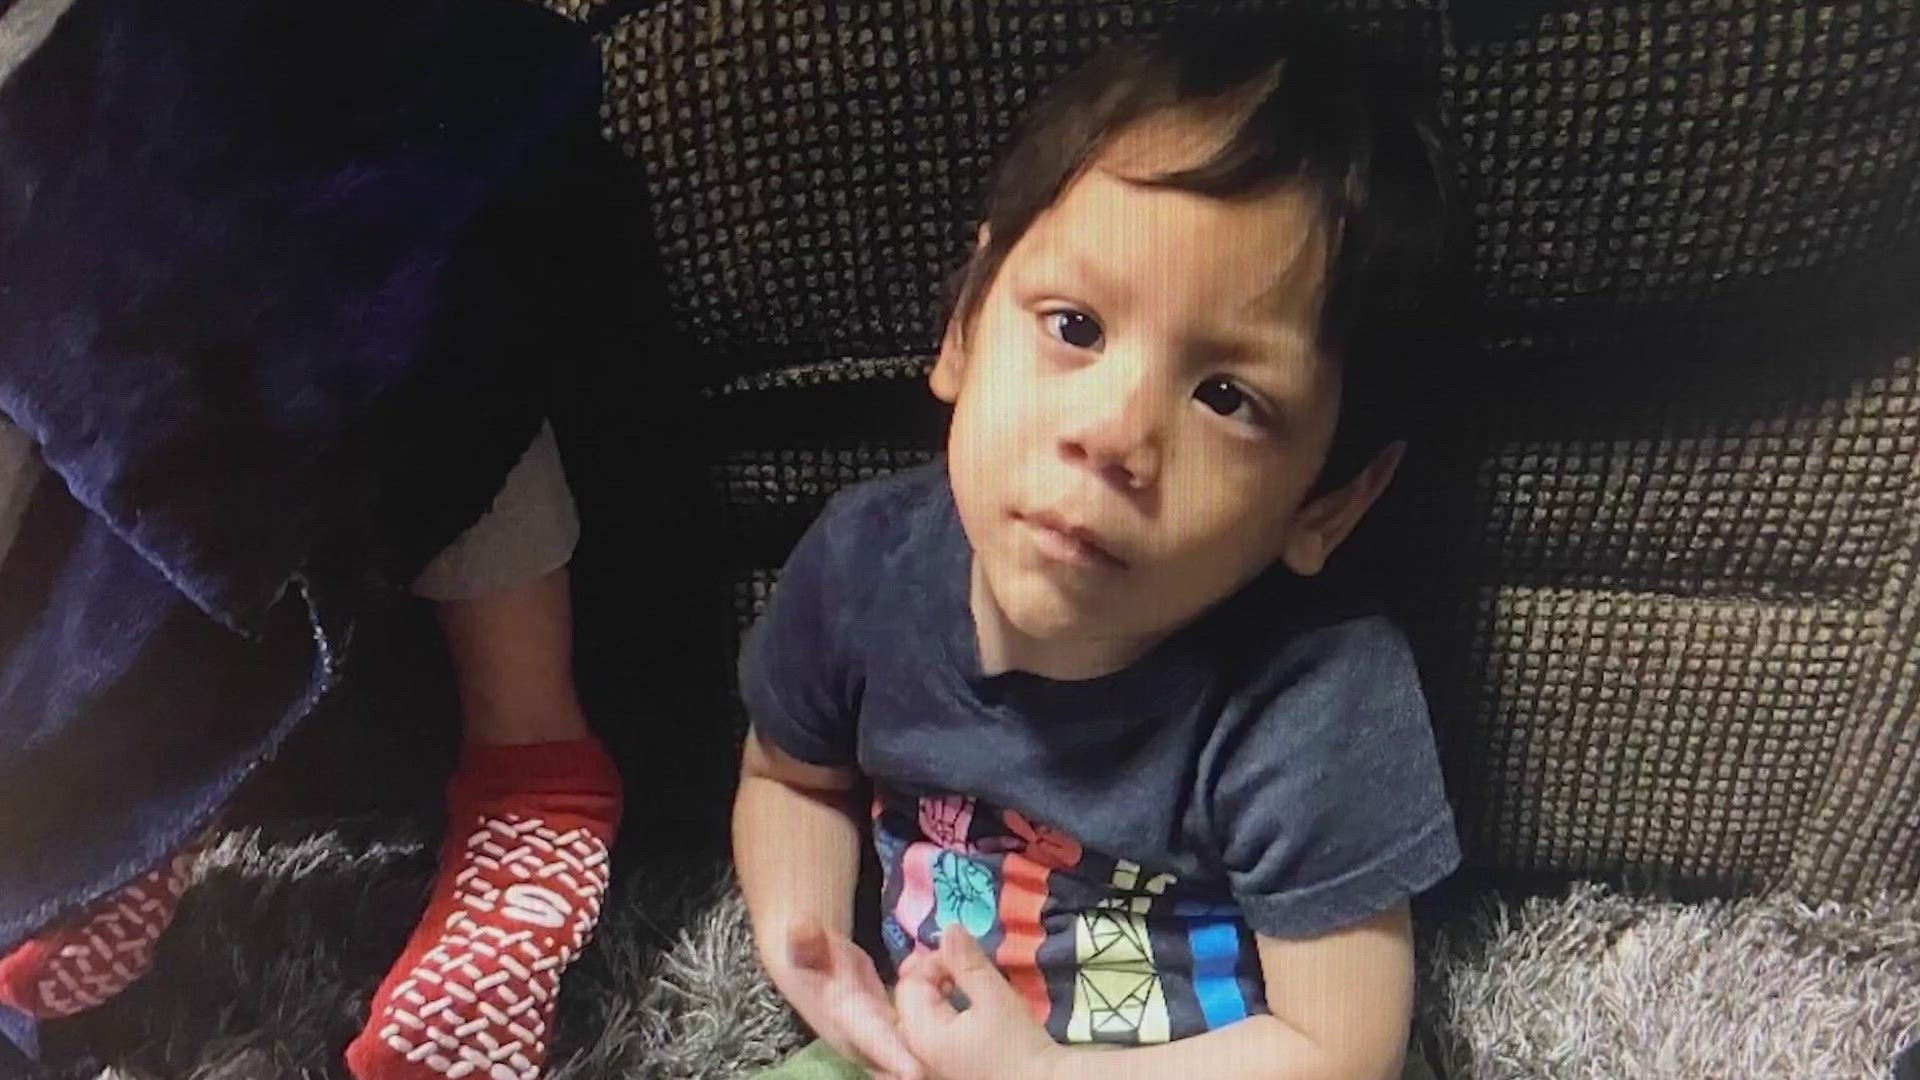 Everman missing child: Police still looking for 6-year-old boy | wfaa.com